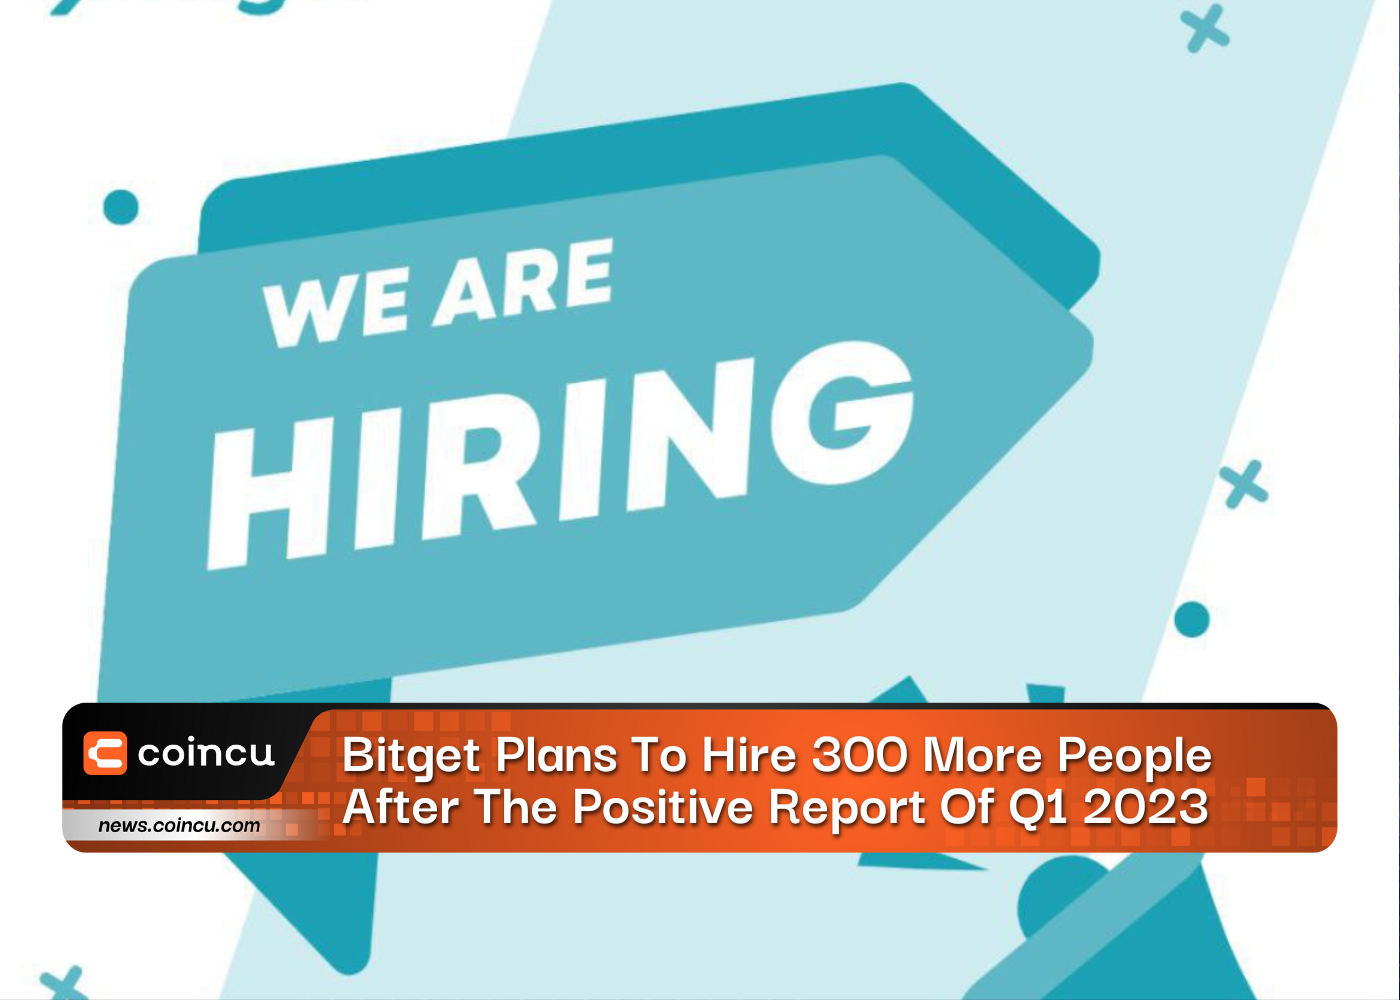 Bitget Plans To Hire 300 More People After The Positive Report Of Q1 2023